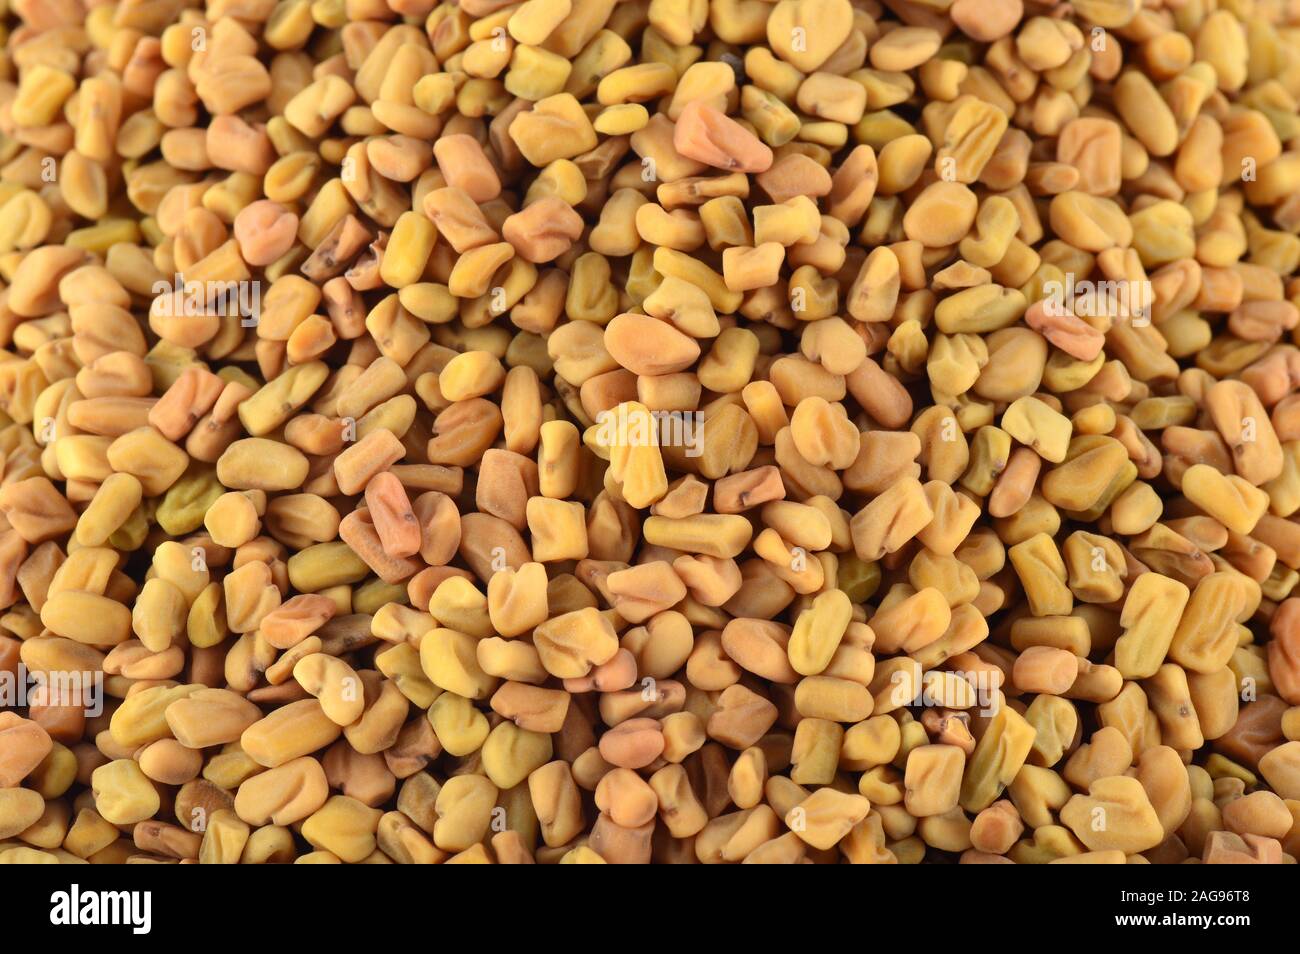 Fenugreek seeds as background. Close up texture Stock Photo